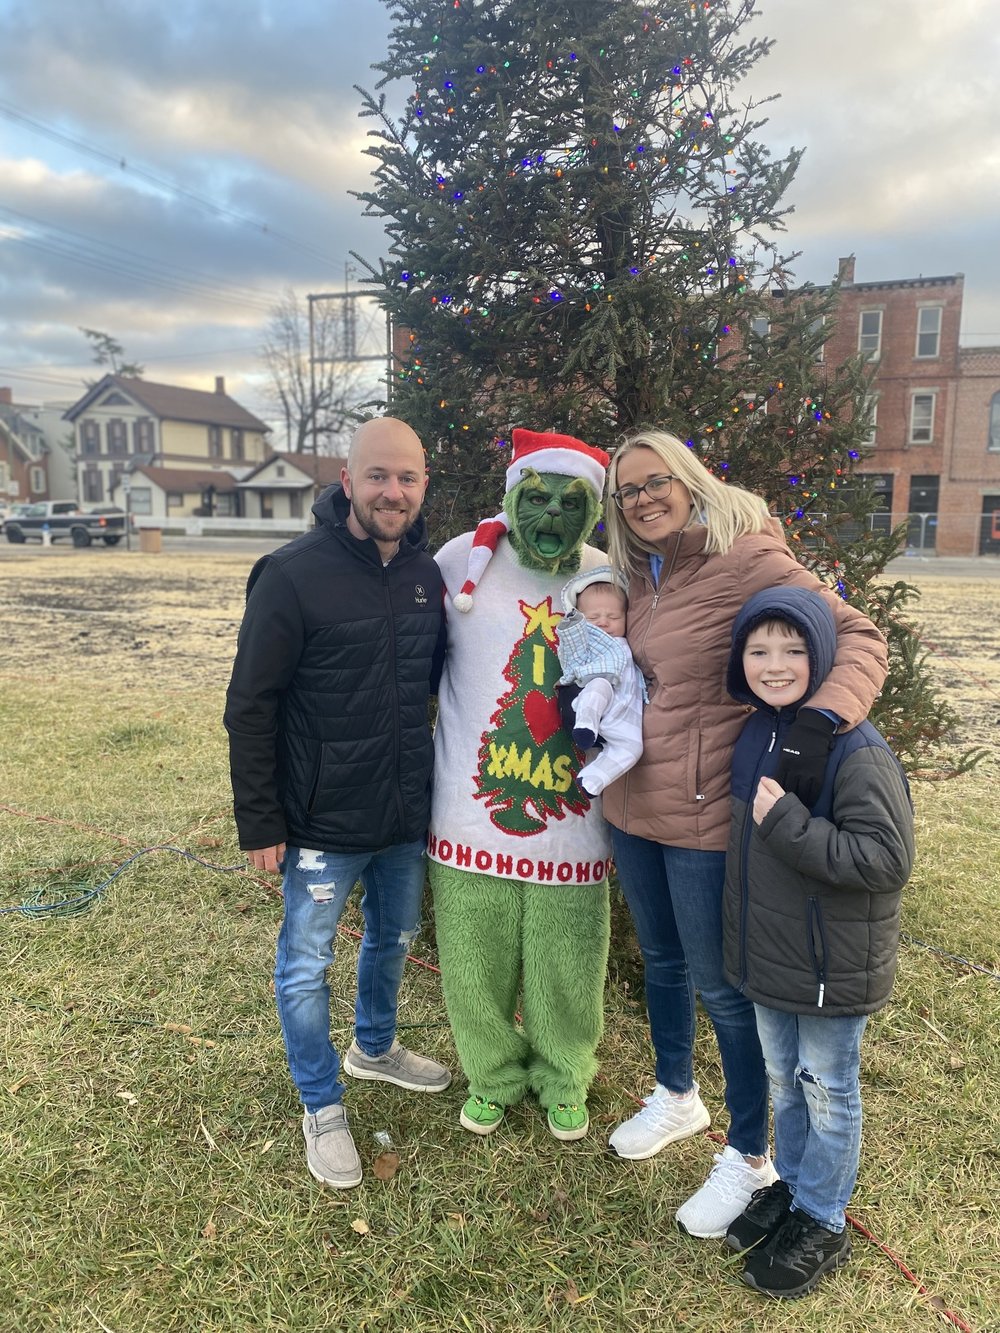 man, woman and 2 kids pose with a green Grinch in a sunny park setting